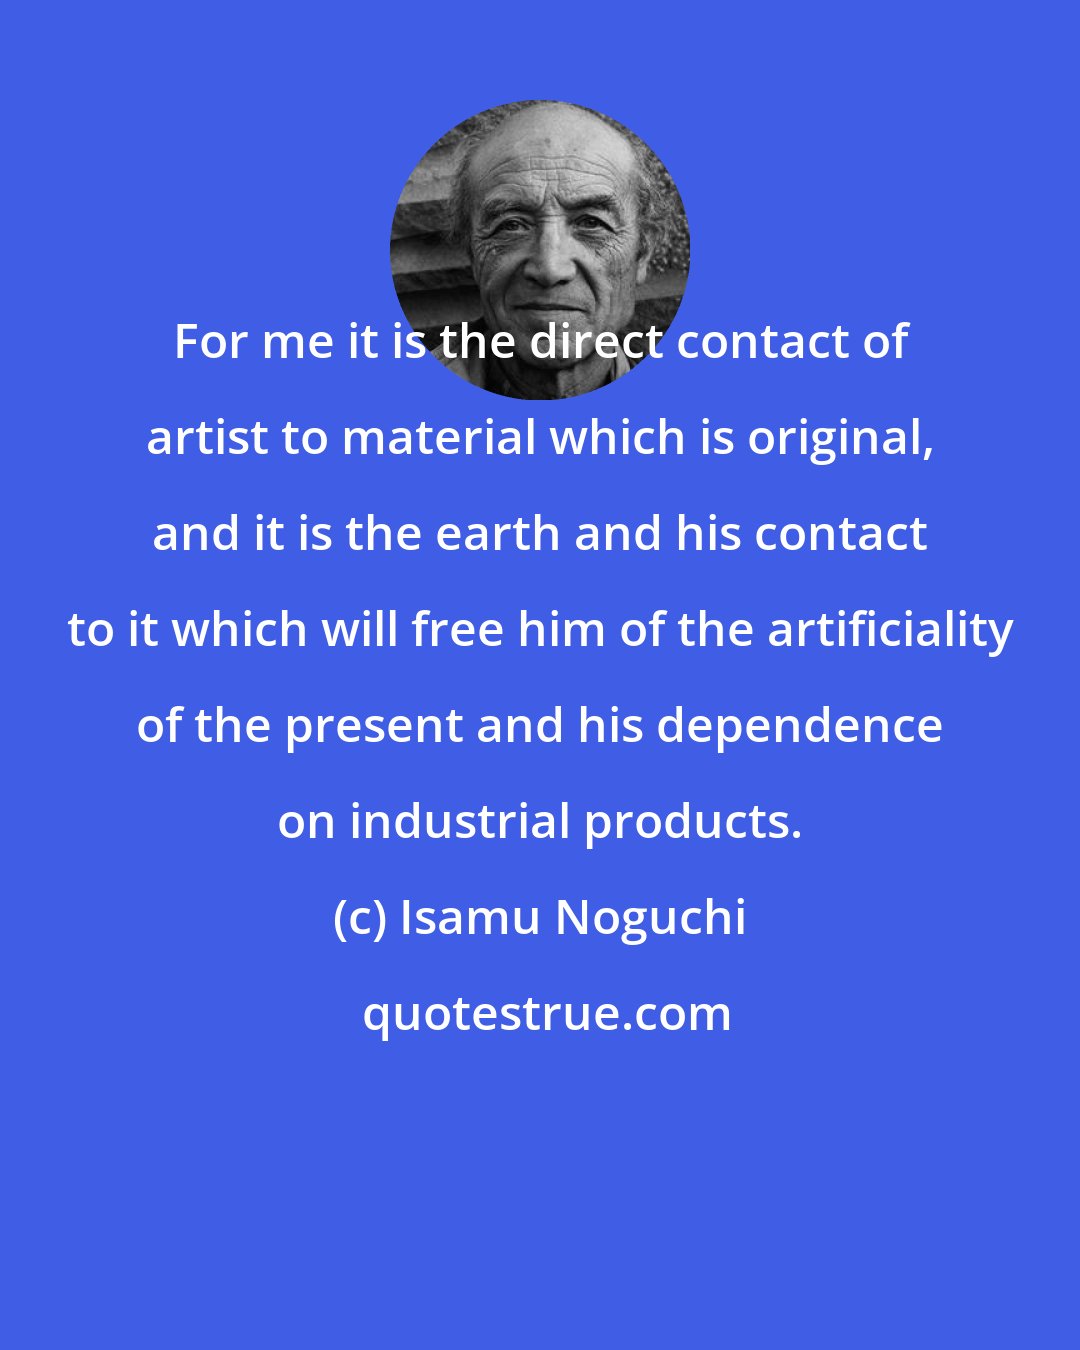 Isamu Noguchi: For me it is the direct contact of artist to material which is original, and it is the earth and his contact to it which will free him of the artificiality of the present and his dependence on industrial products.